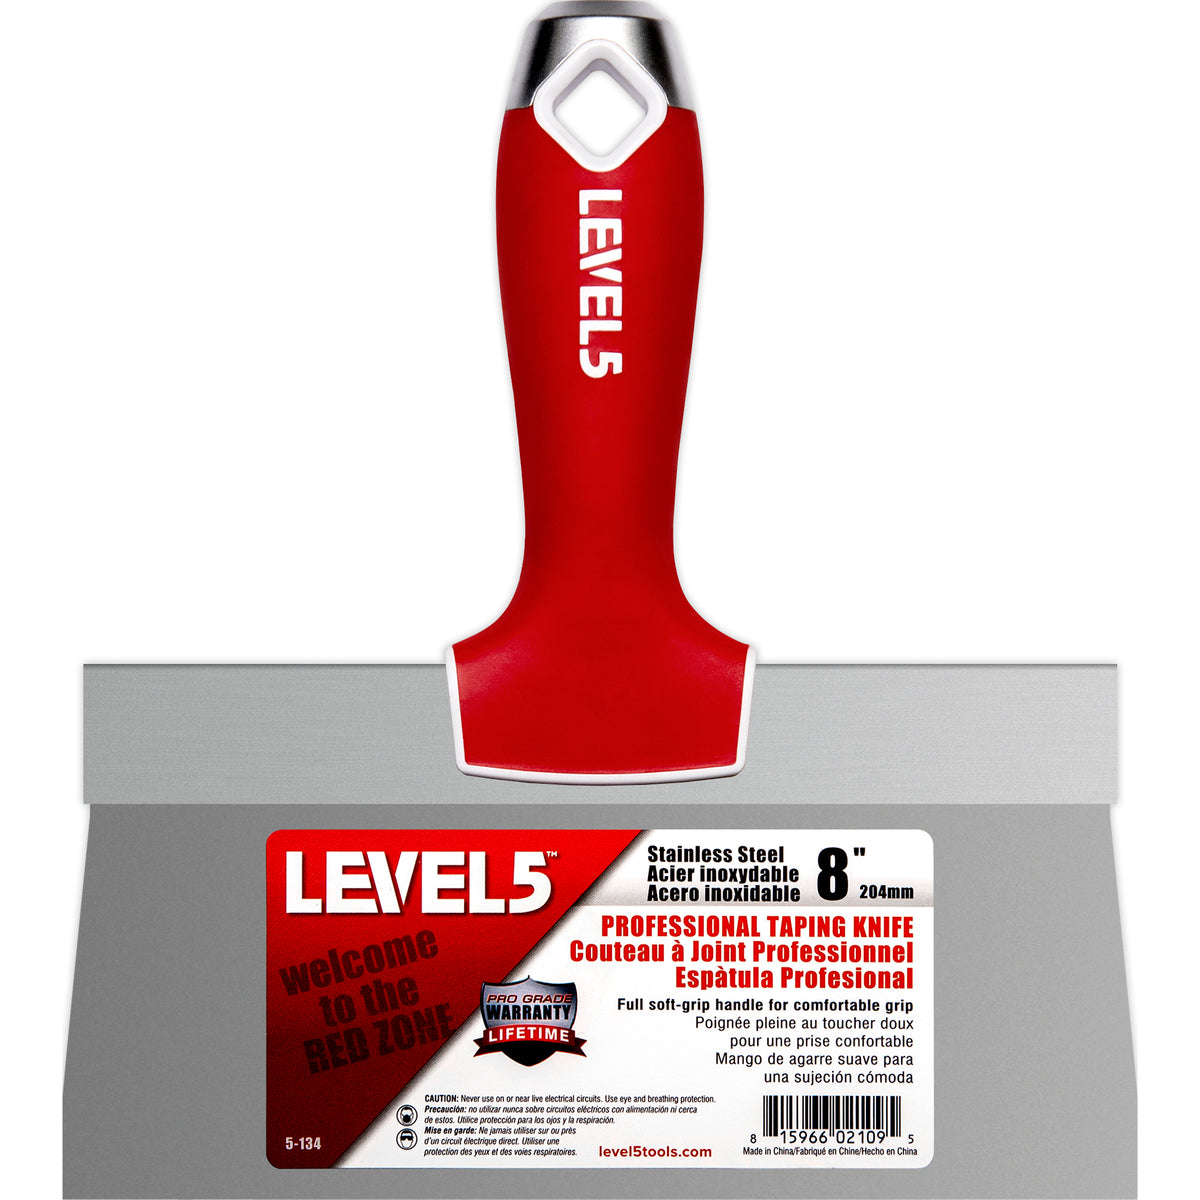 Level 5 Stainless Steel Taping Knife - Soft Grip Handle